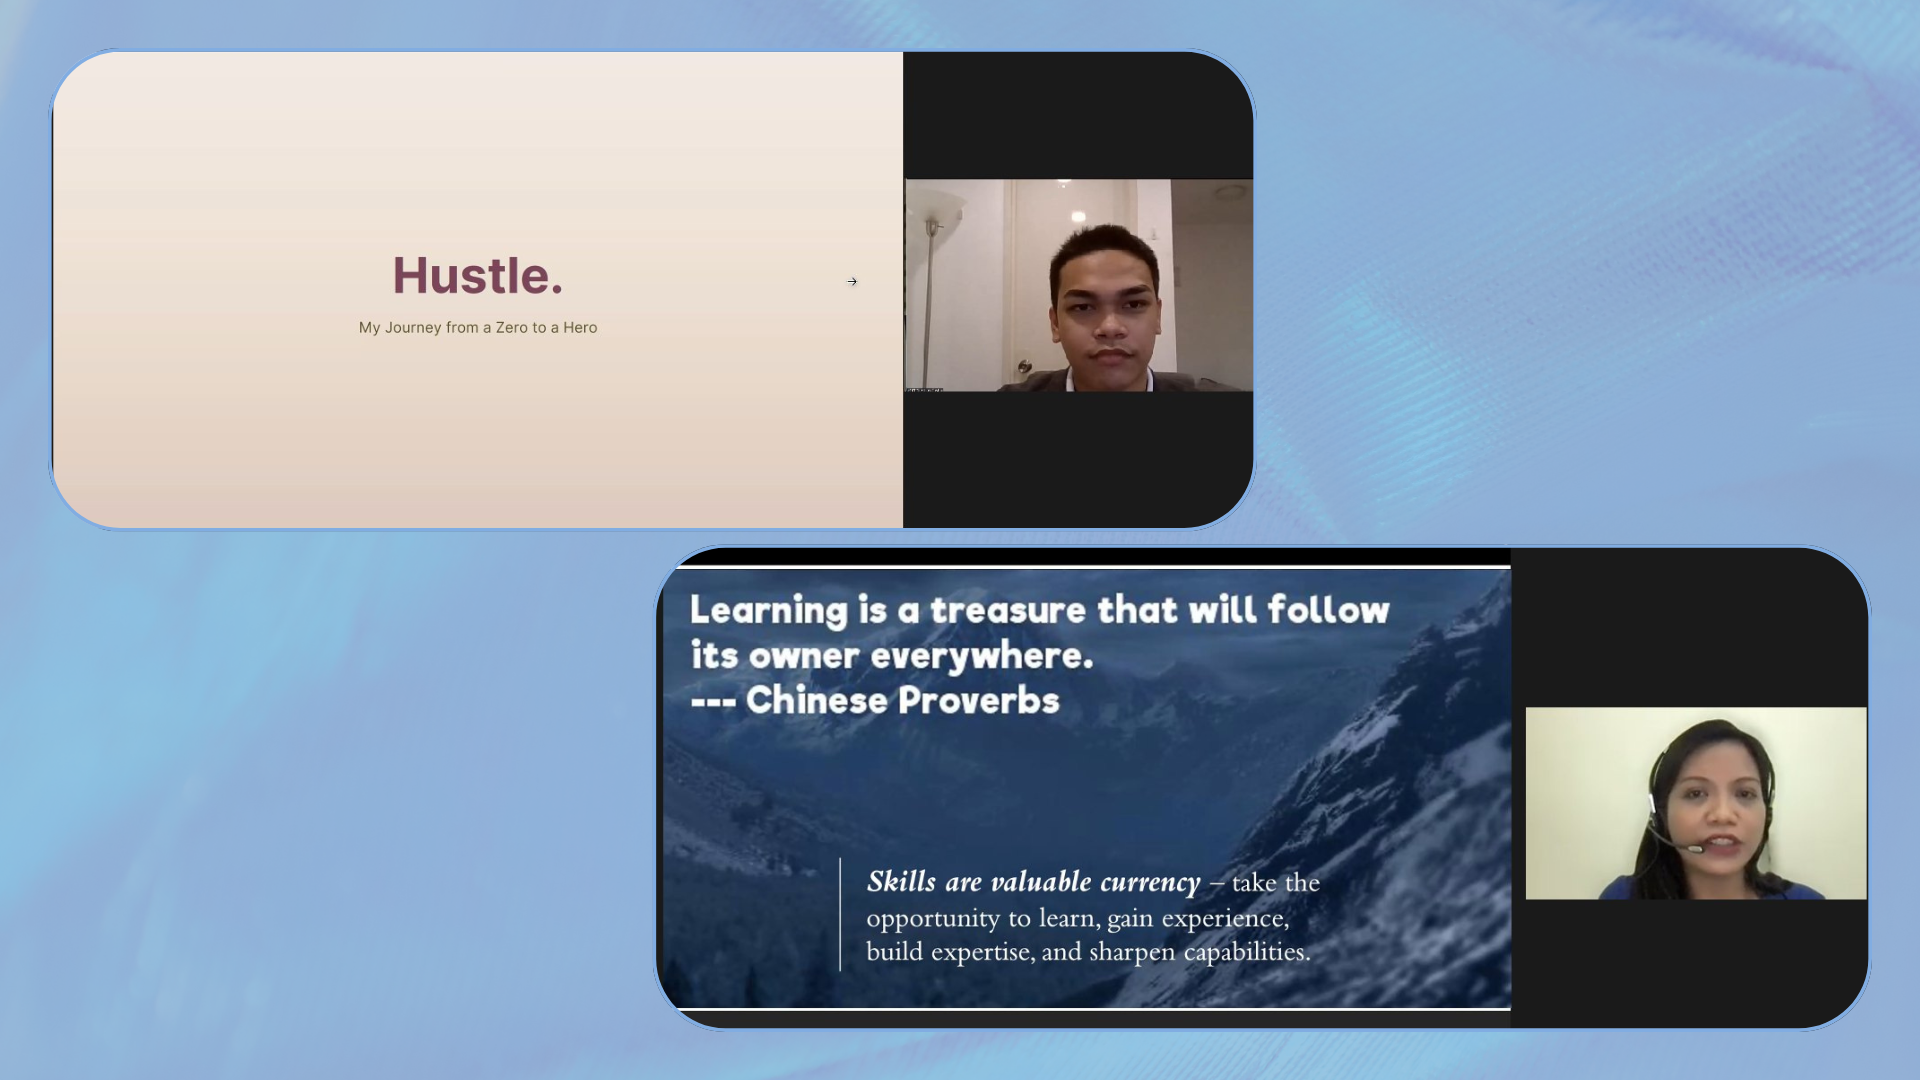 Upper left is a screen capture of Pathways Alum Cee Jhay next to his slide that says "Hustle, From Zero to Hero". Lower right is a screen capture of FilInvest VP Bing Paraguas next to her slide that says "Learning is a treasure that follows its owner everywhere."